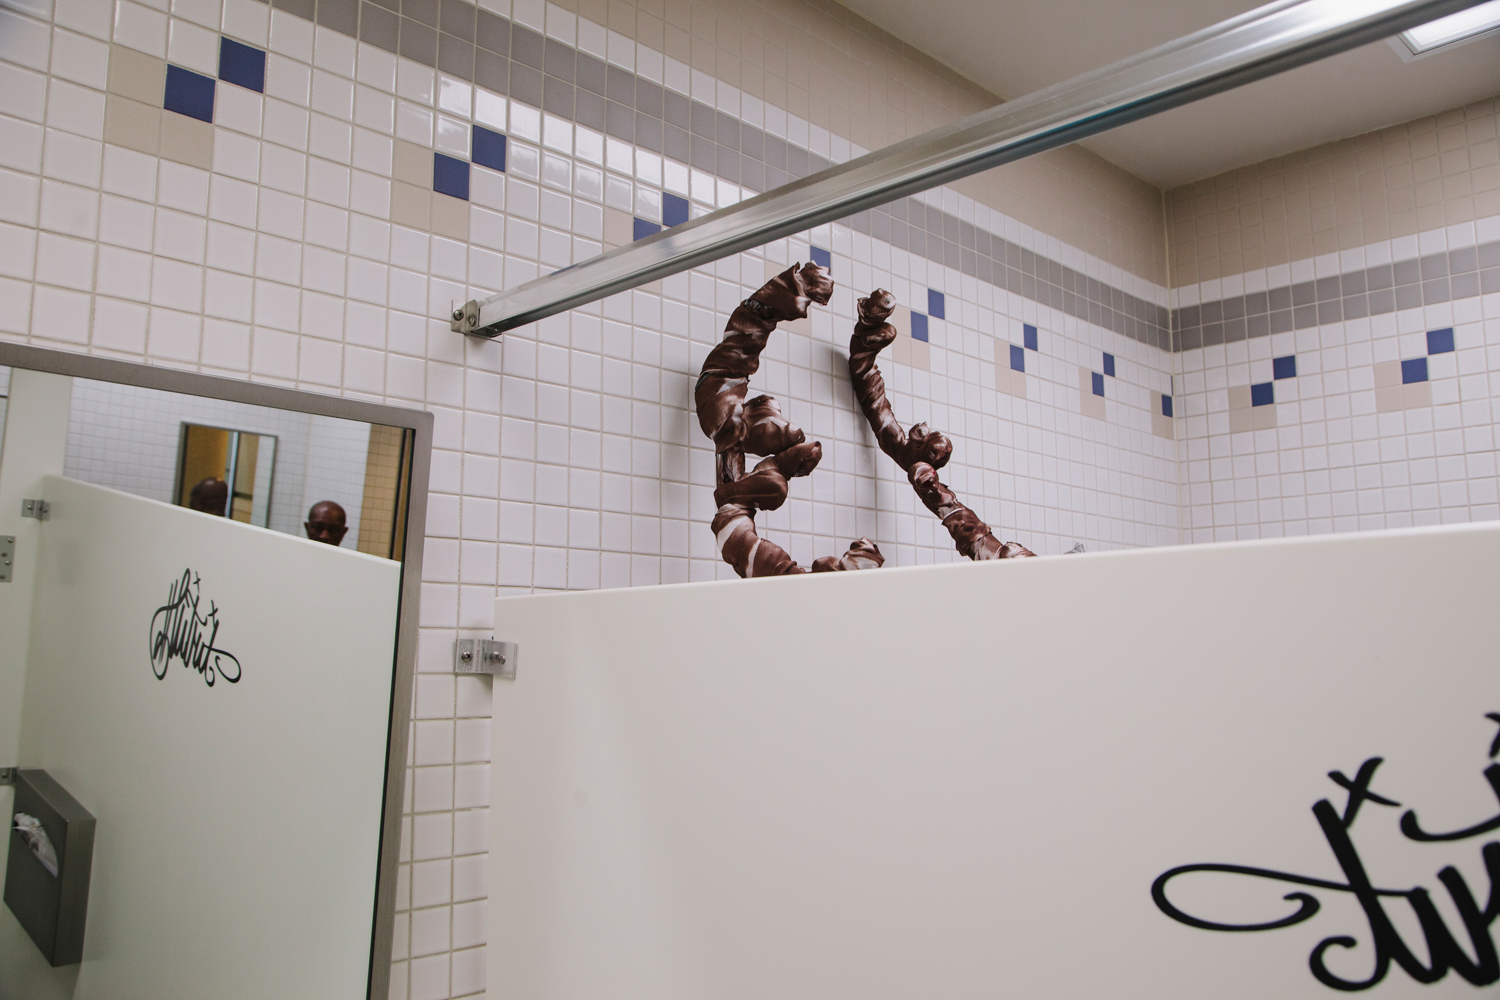 Antlers in the Men's Room, Orlando, FL, 2013, from the project, 'Florida: Eden Isle'.